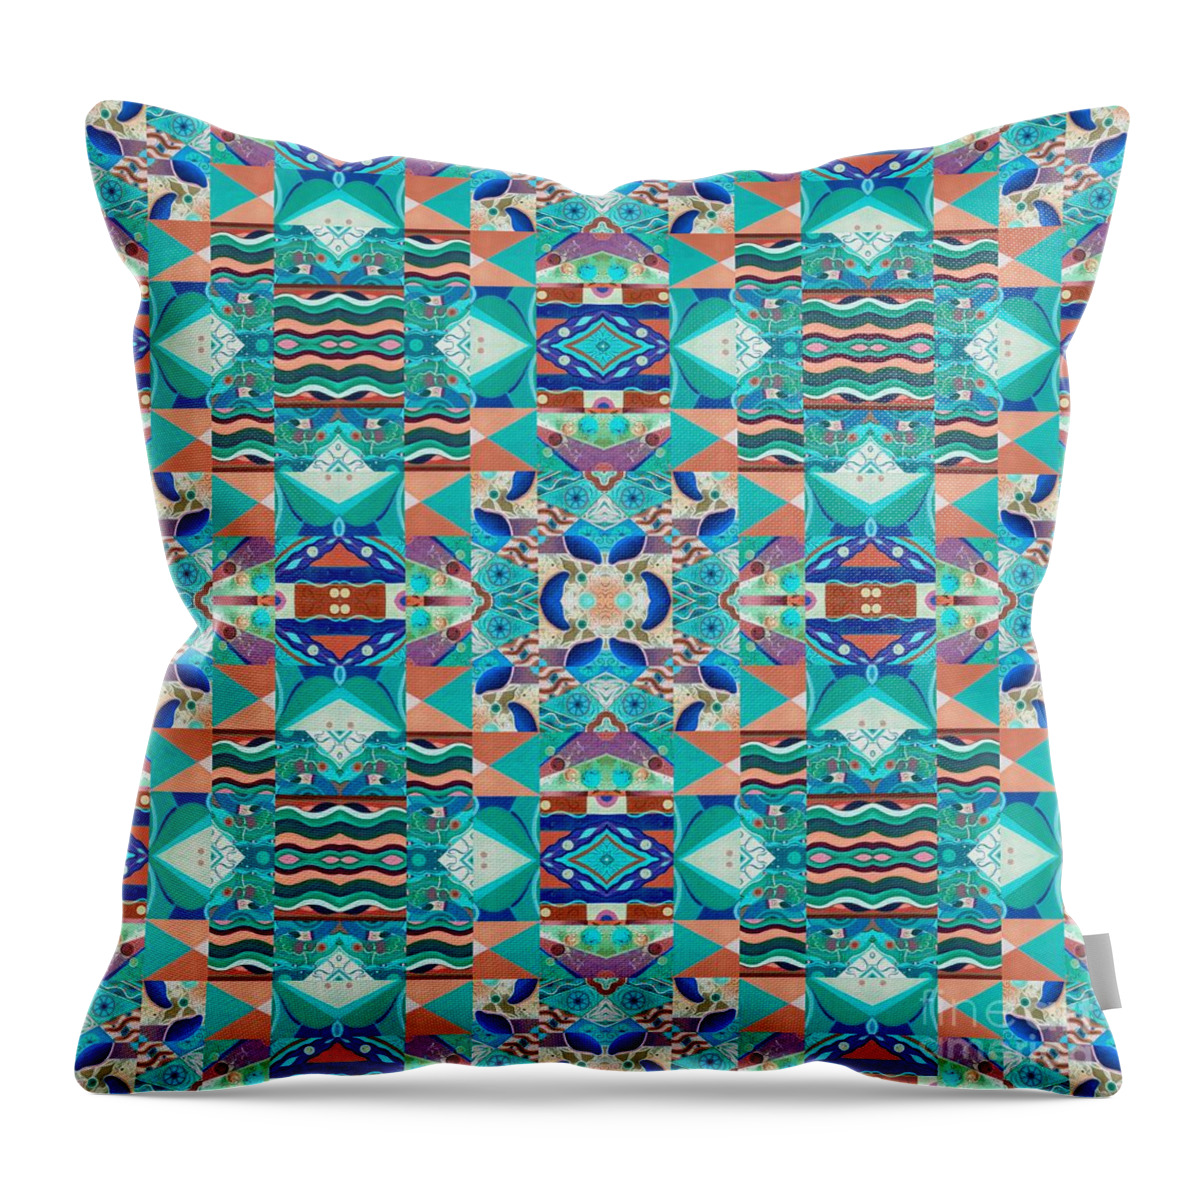 The Joy Of Design Mandala Series Puzzle 8 Arrangement 6 Quadrupled Inverted By Helena Tiainen Throw Pillow featuring the painting The Joy of Design Mandala Series Puzzle 8 Arrangement 6 Quadrupled Inverted by Helena Tiainen